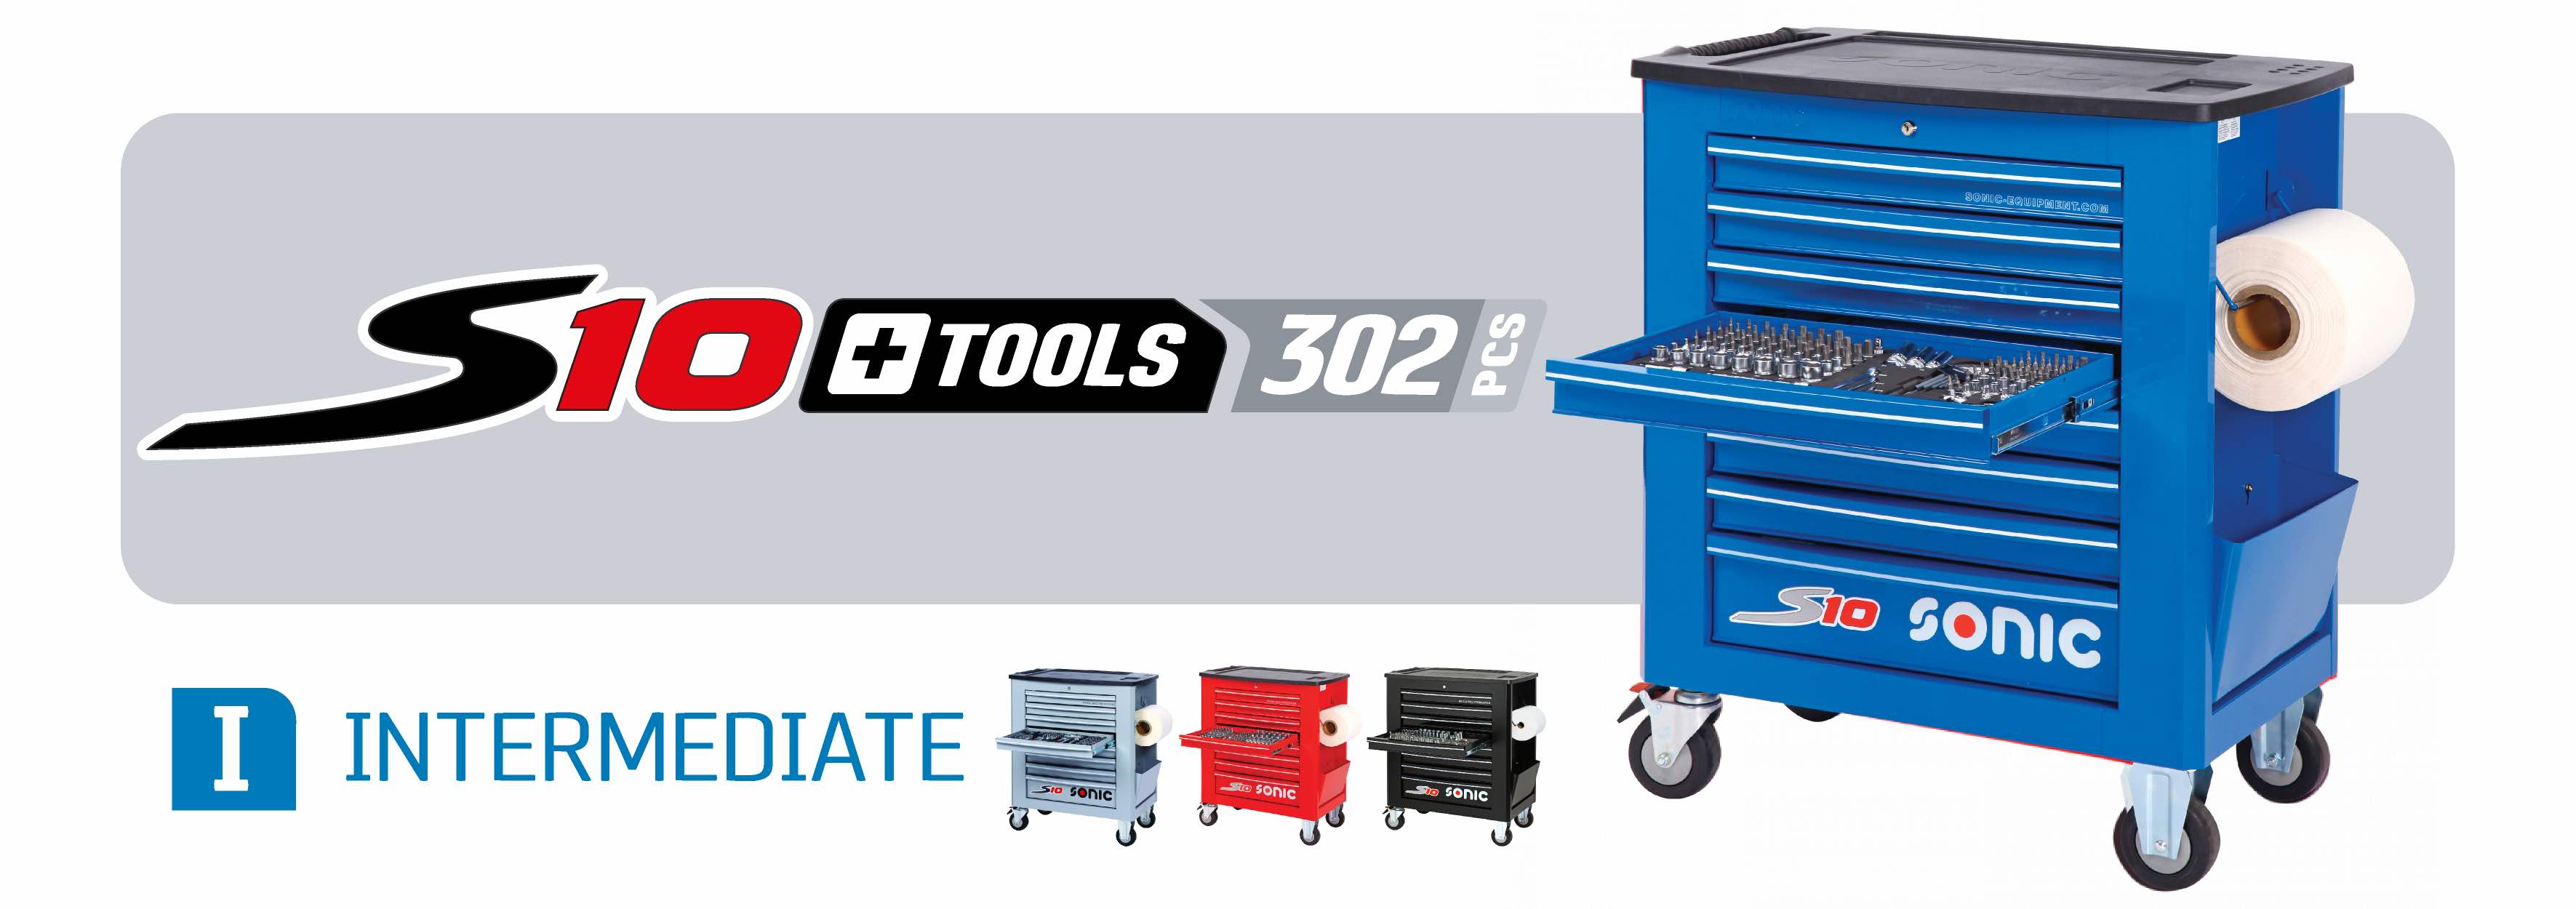 S10 toolbox with tools